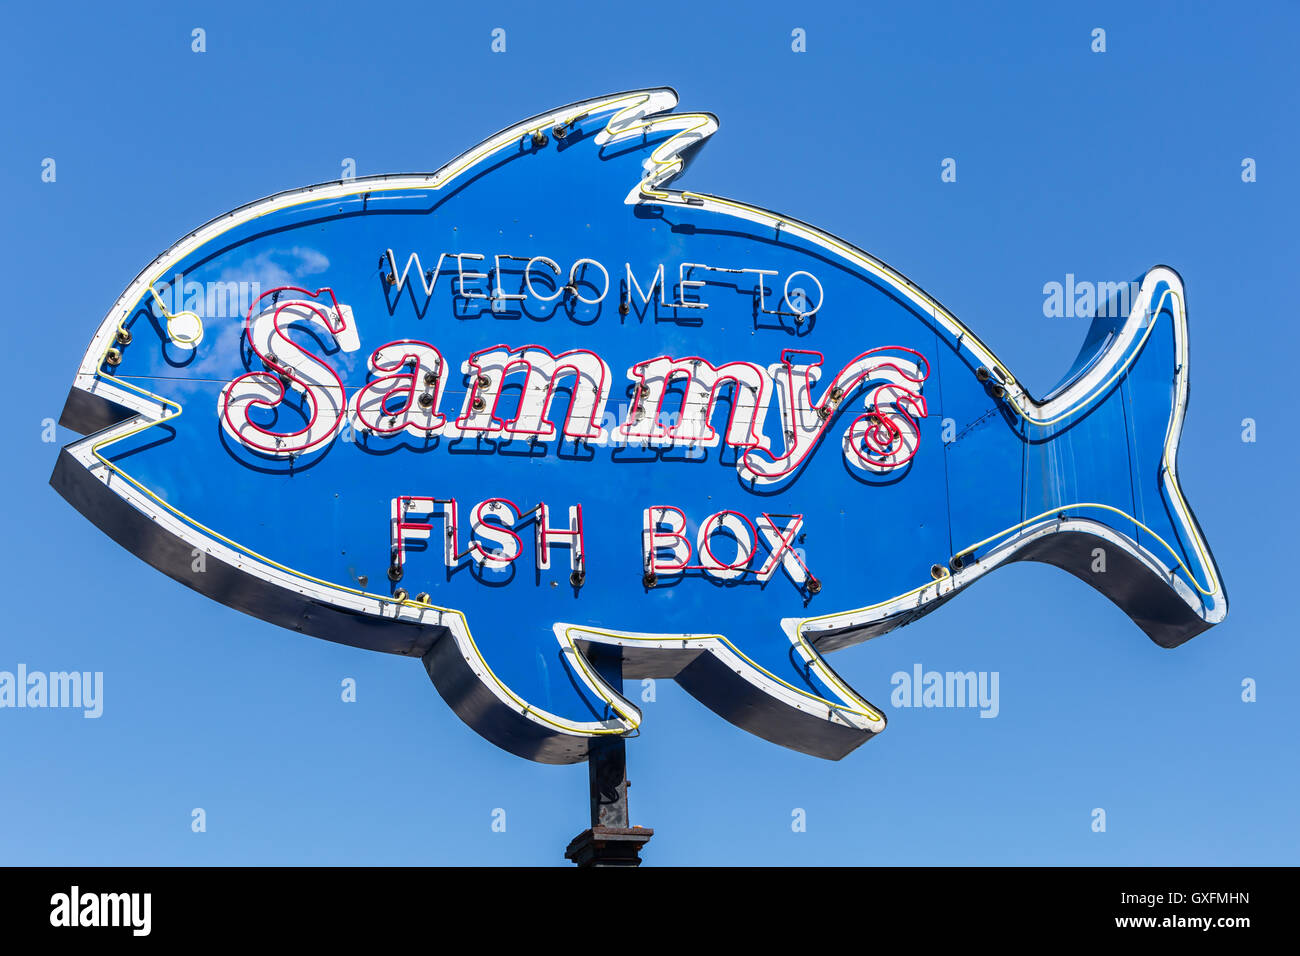 A fish-shaped neon sign welcomes diners to Sammy's Fish Box, a seafood restaurant on City Island in the Bronx, New York City. Stock Photo